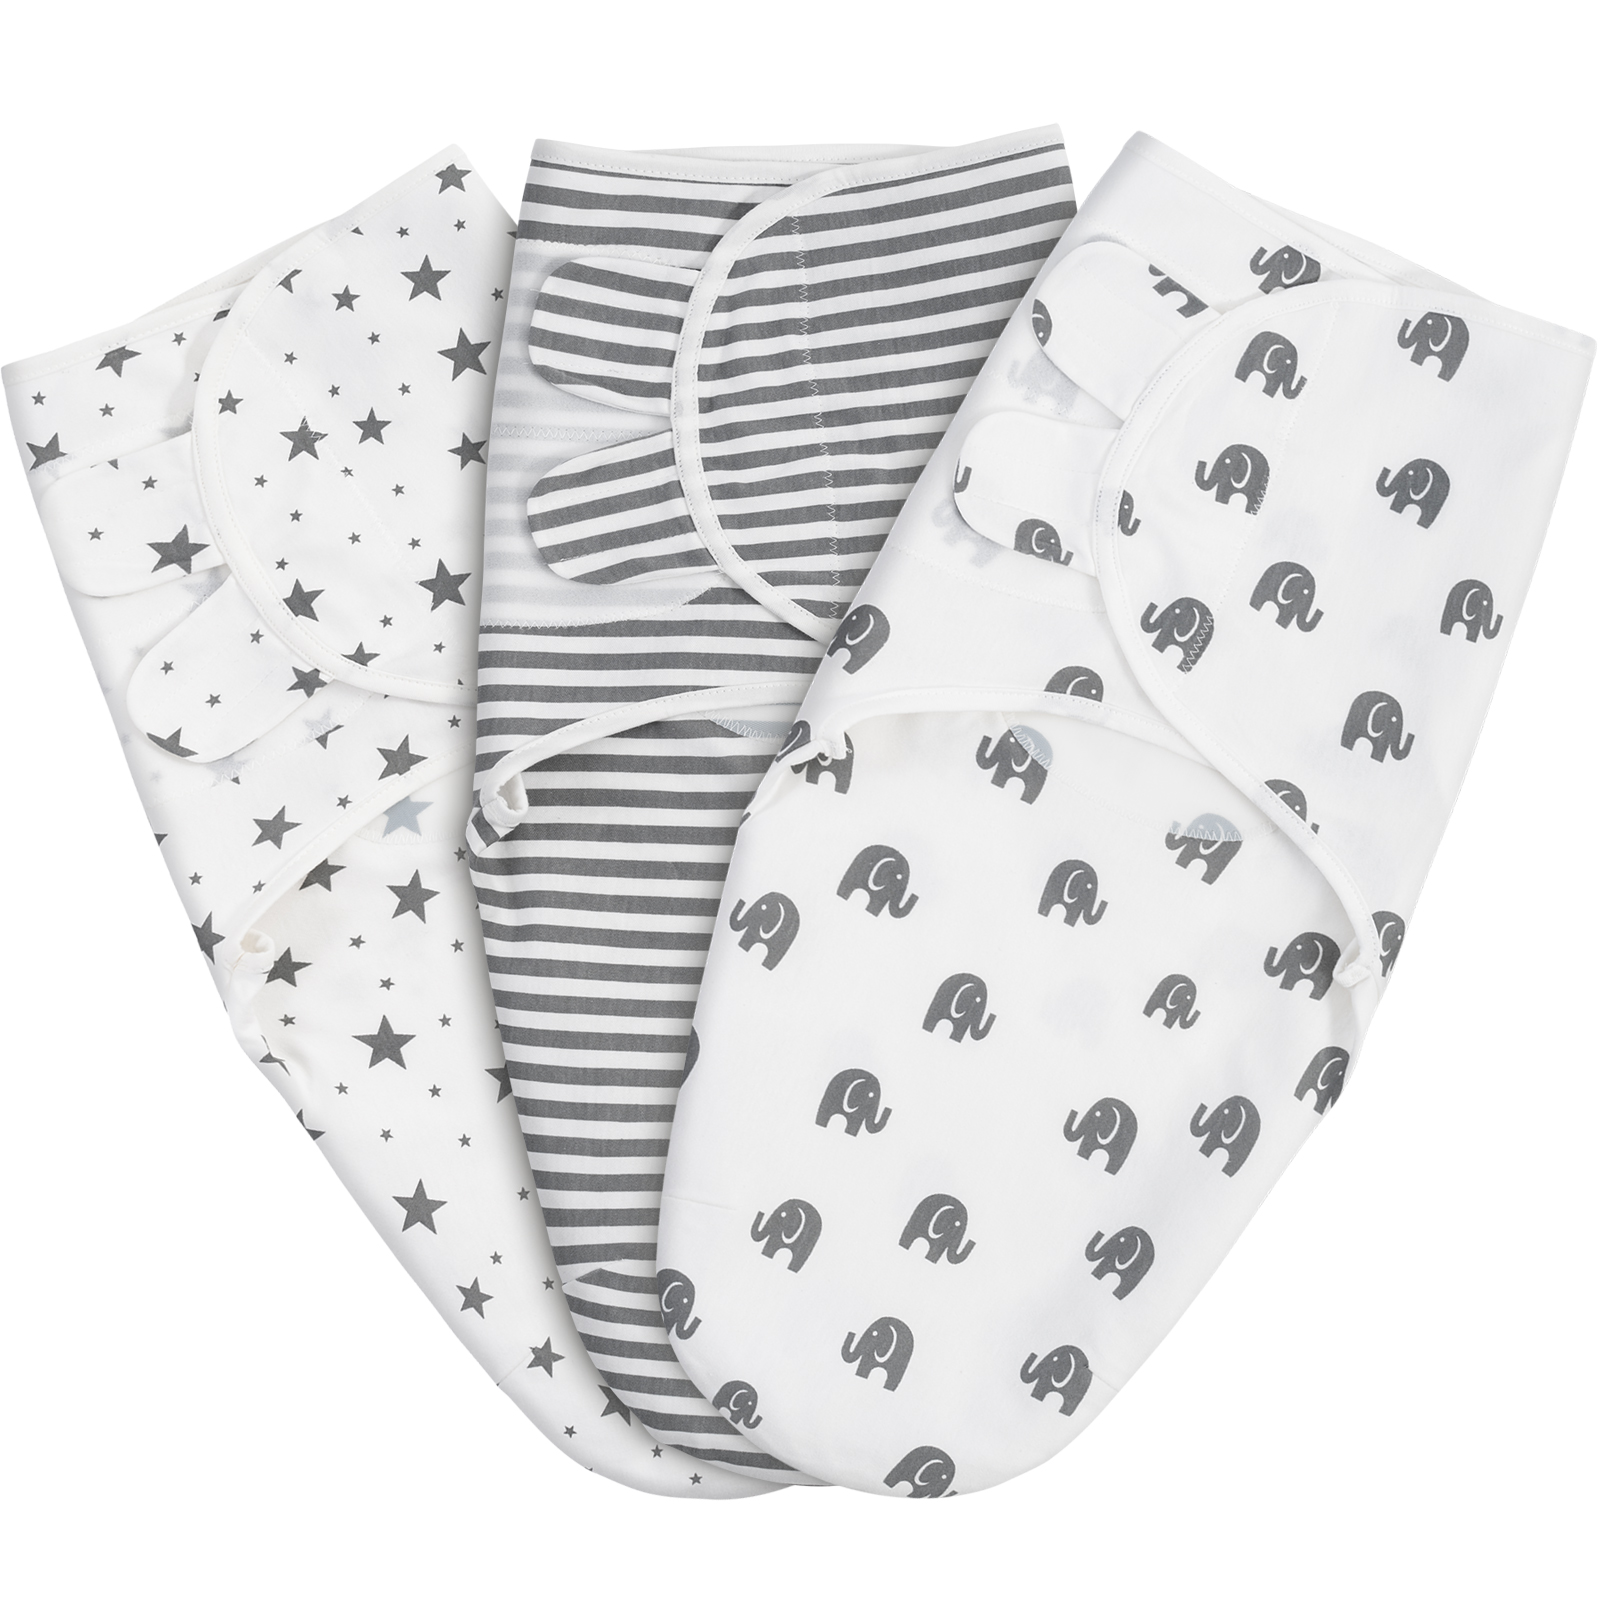 Grey Planet | Gllquen Baby Swaddle 0-3 Months 3 Pack